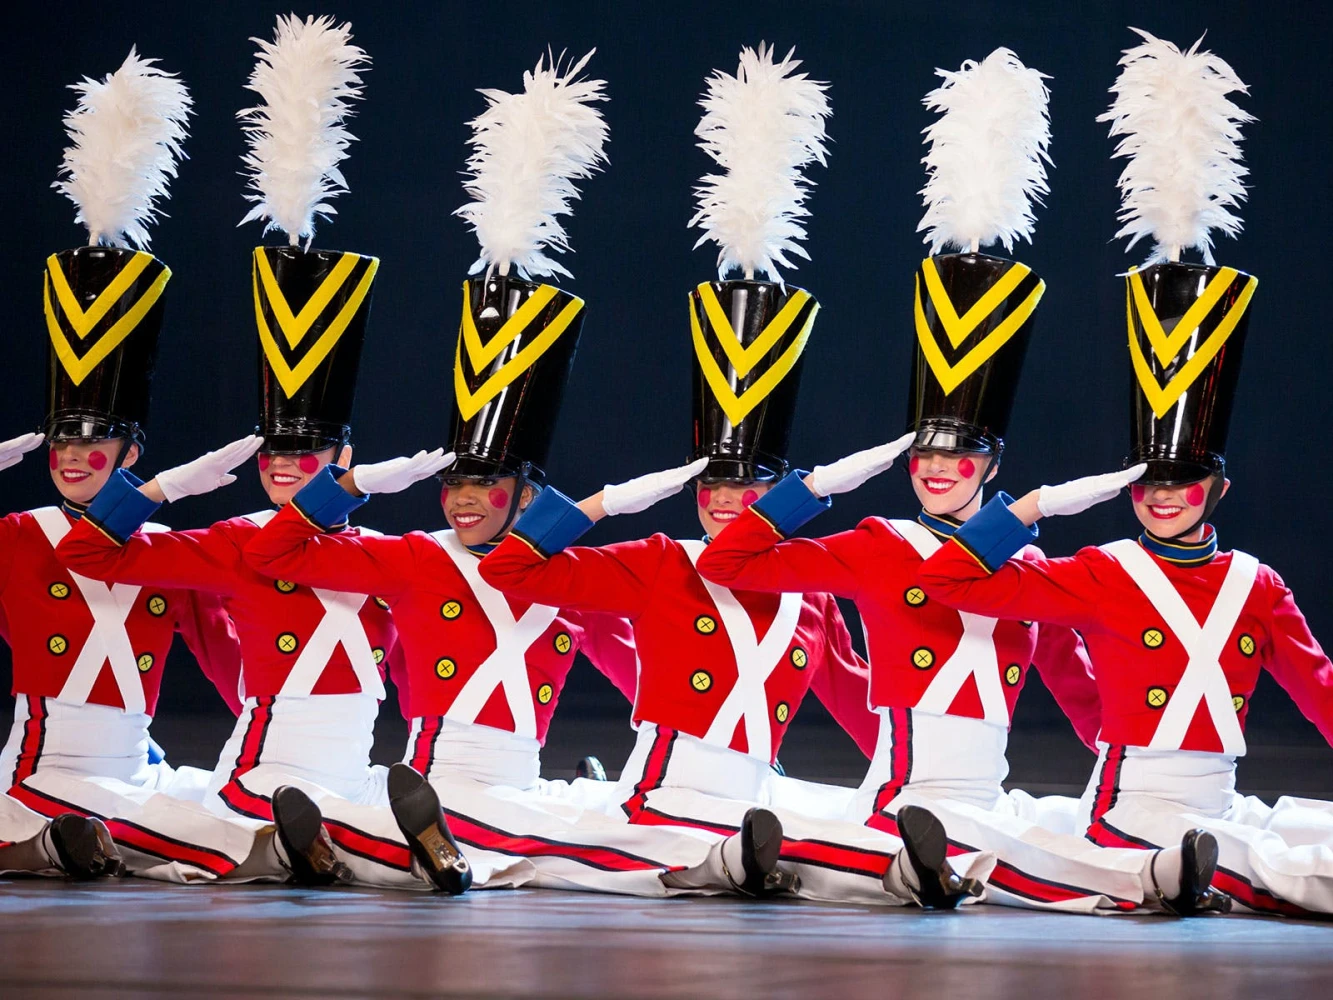 The Rockettes: What to expect - 2